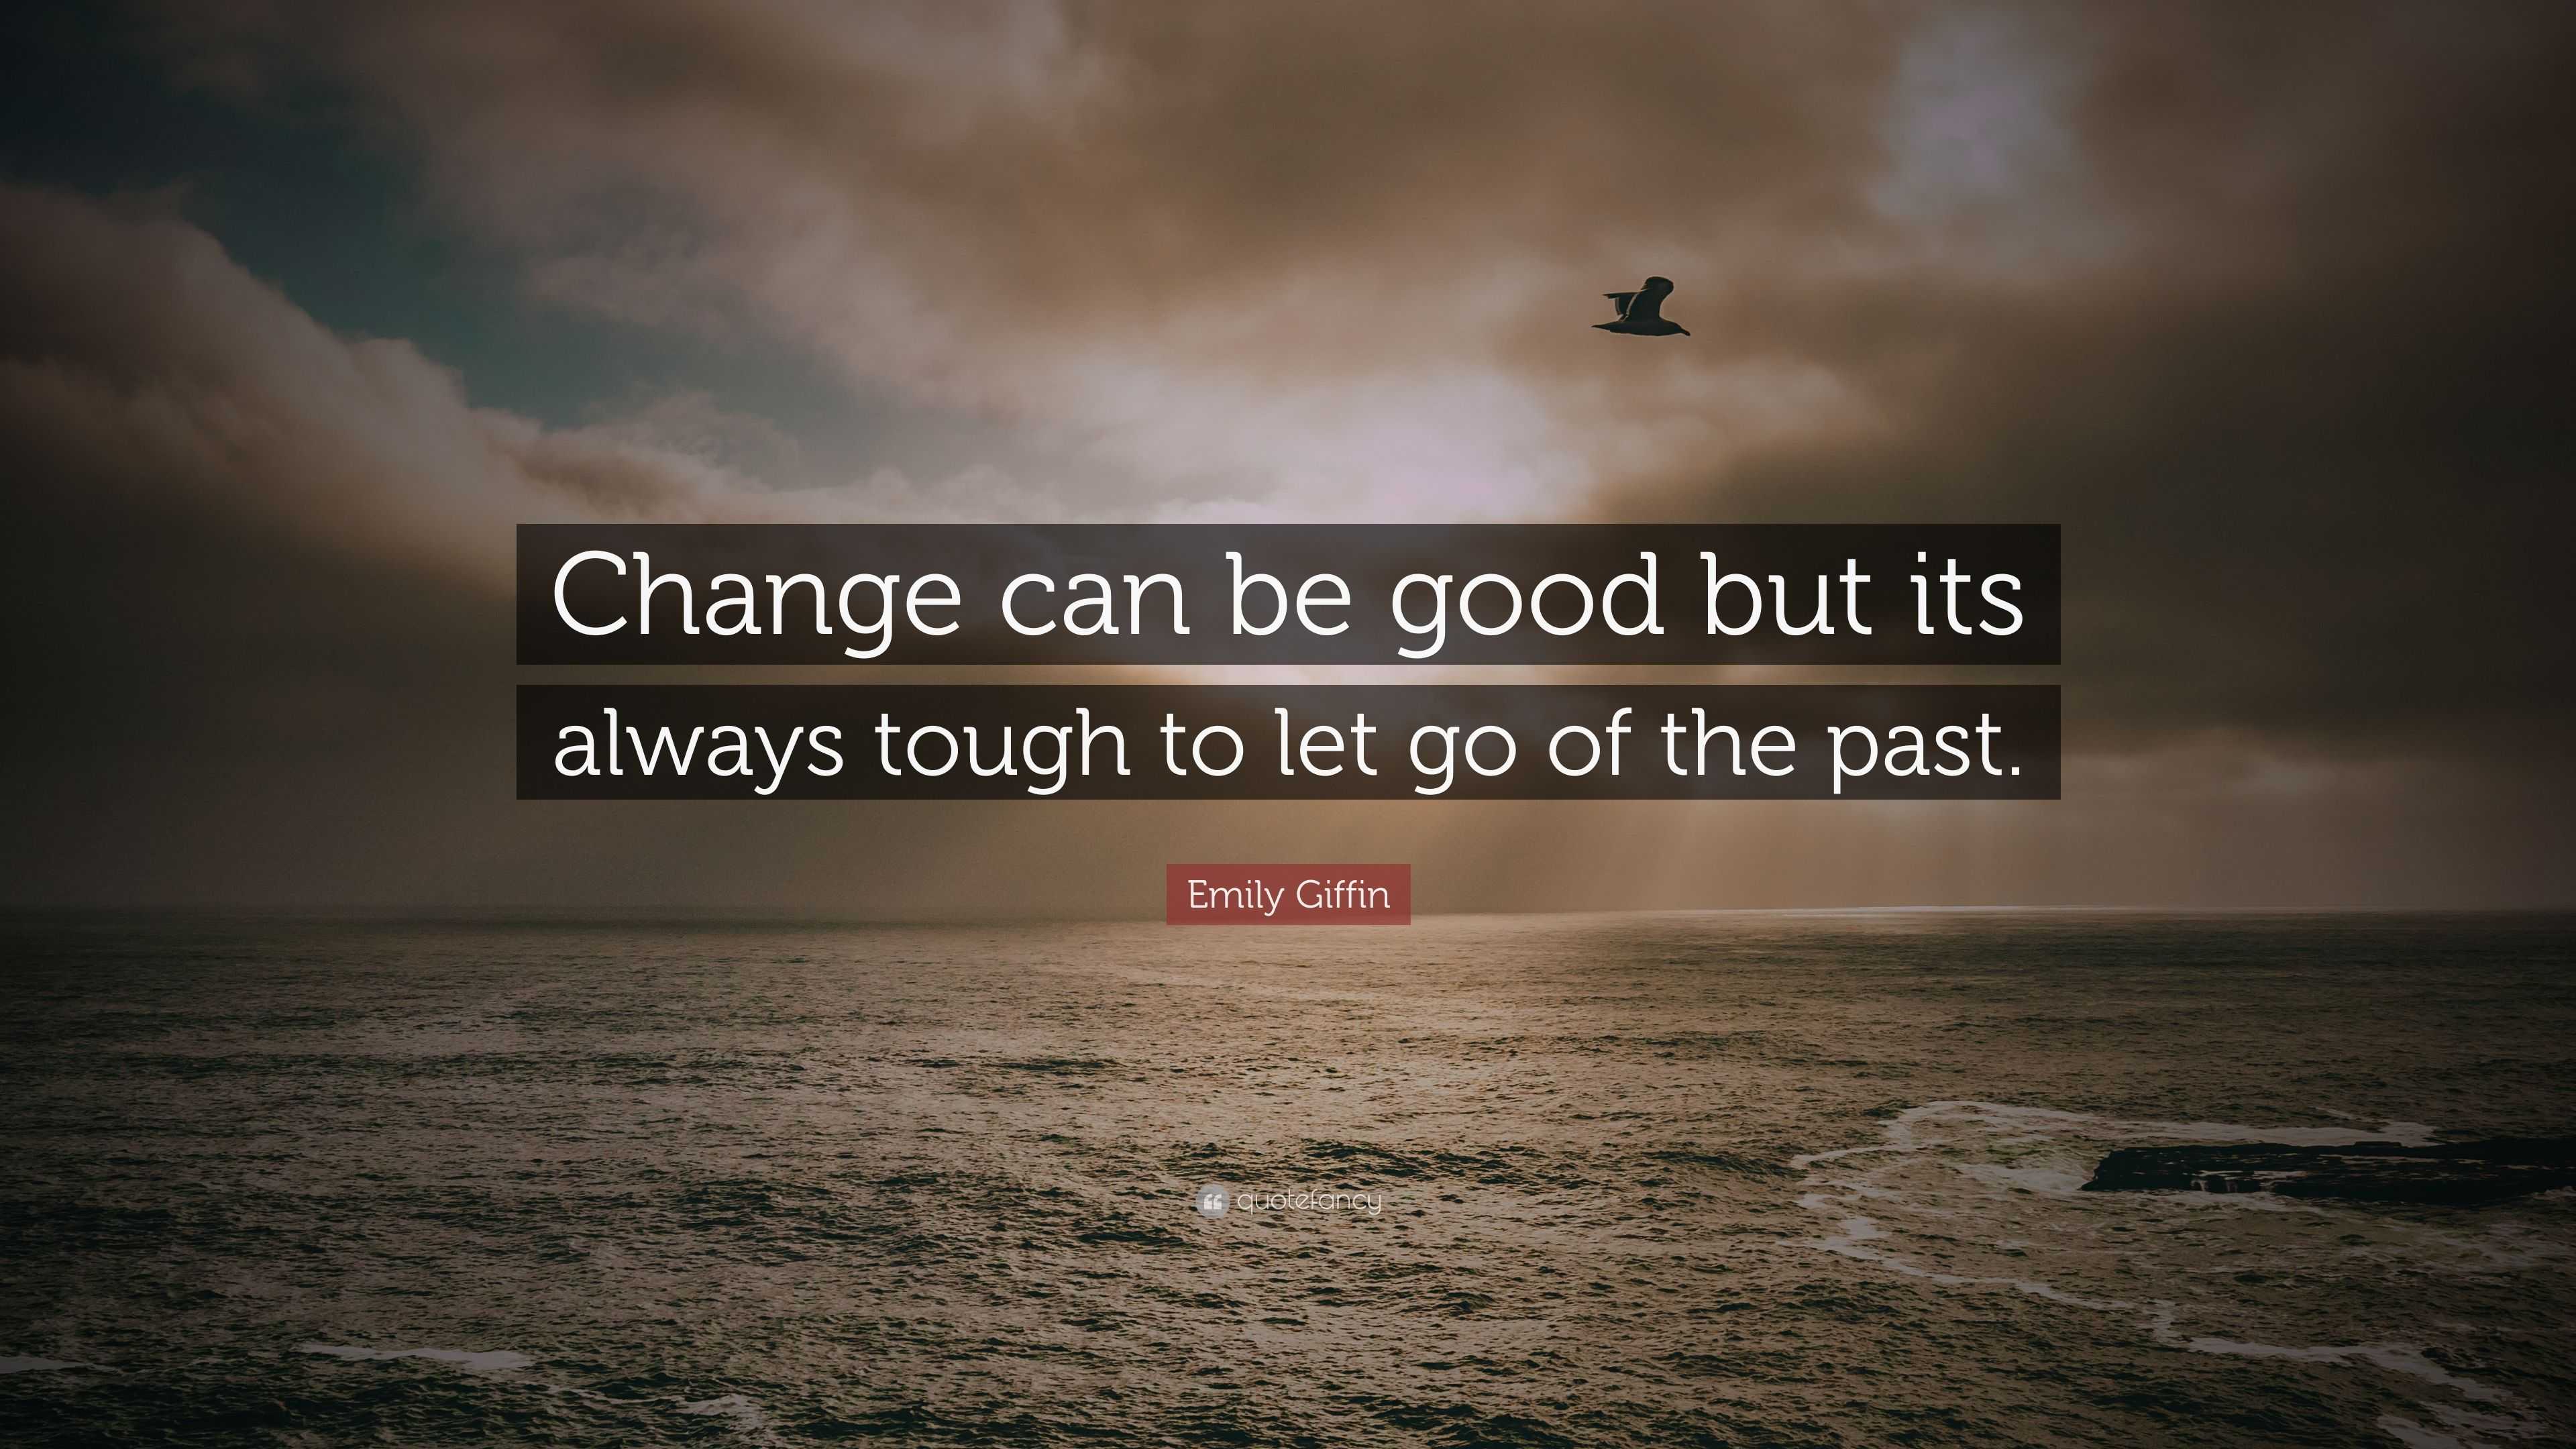 Emily Giffin Quote: “Change can be good but its always tough to let go ...